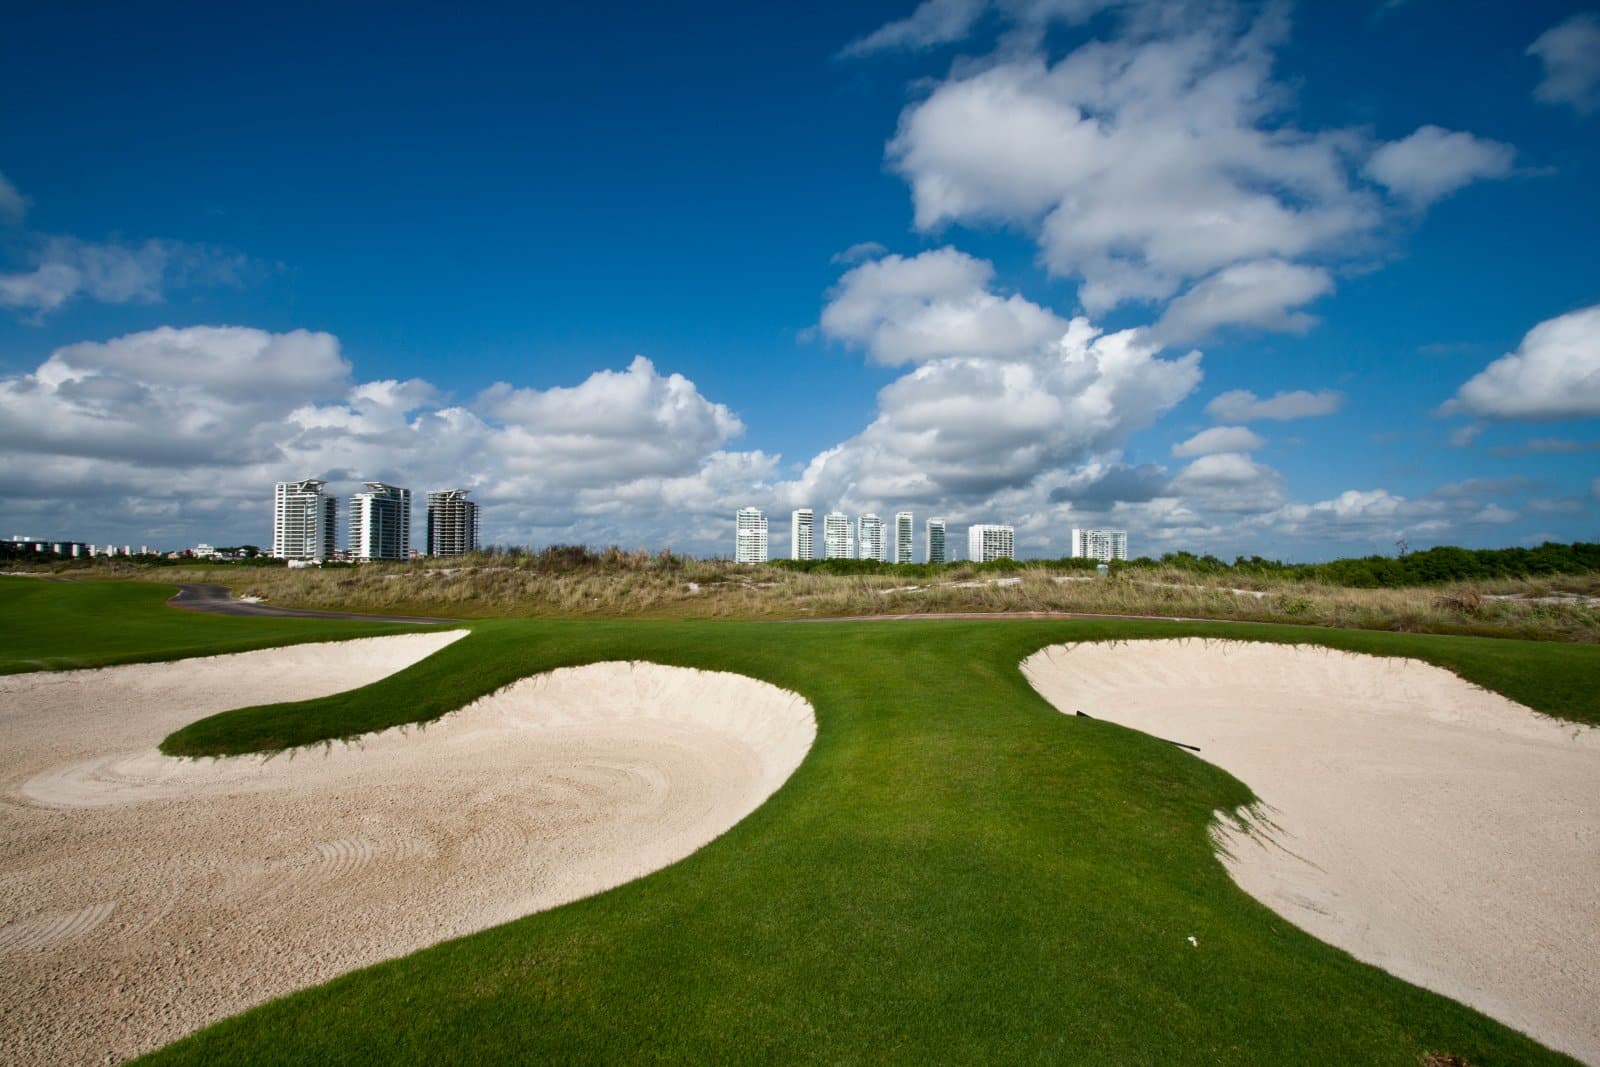 <p><span>Cancún and its surrounding area offer some of the most scenic golf courses in the Caribbean. With courses designed by renowned architects like Jack Nicklaus and Greg Norman, golfers of all levels can enjoy a round in spectacular settings.</span></p> <p><b>Insider’s Tip: </b><span>Check for twilight rates for a more budget-friendly golfing experience.</span></p> <p><b>How To Get There: </b><span>Most golf courses are located within a short drive from the hotel zone.</span></p> <p><b>Best Time To Travel: </b><span>Golfing is excellent year-round, but the cooler months from November to April offer the most comfortable conditions.</span></p>